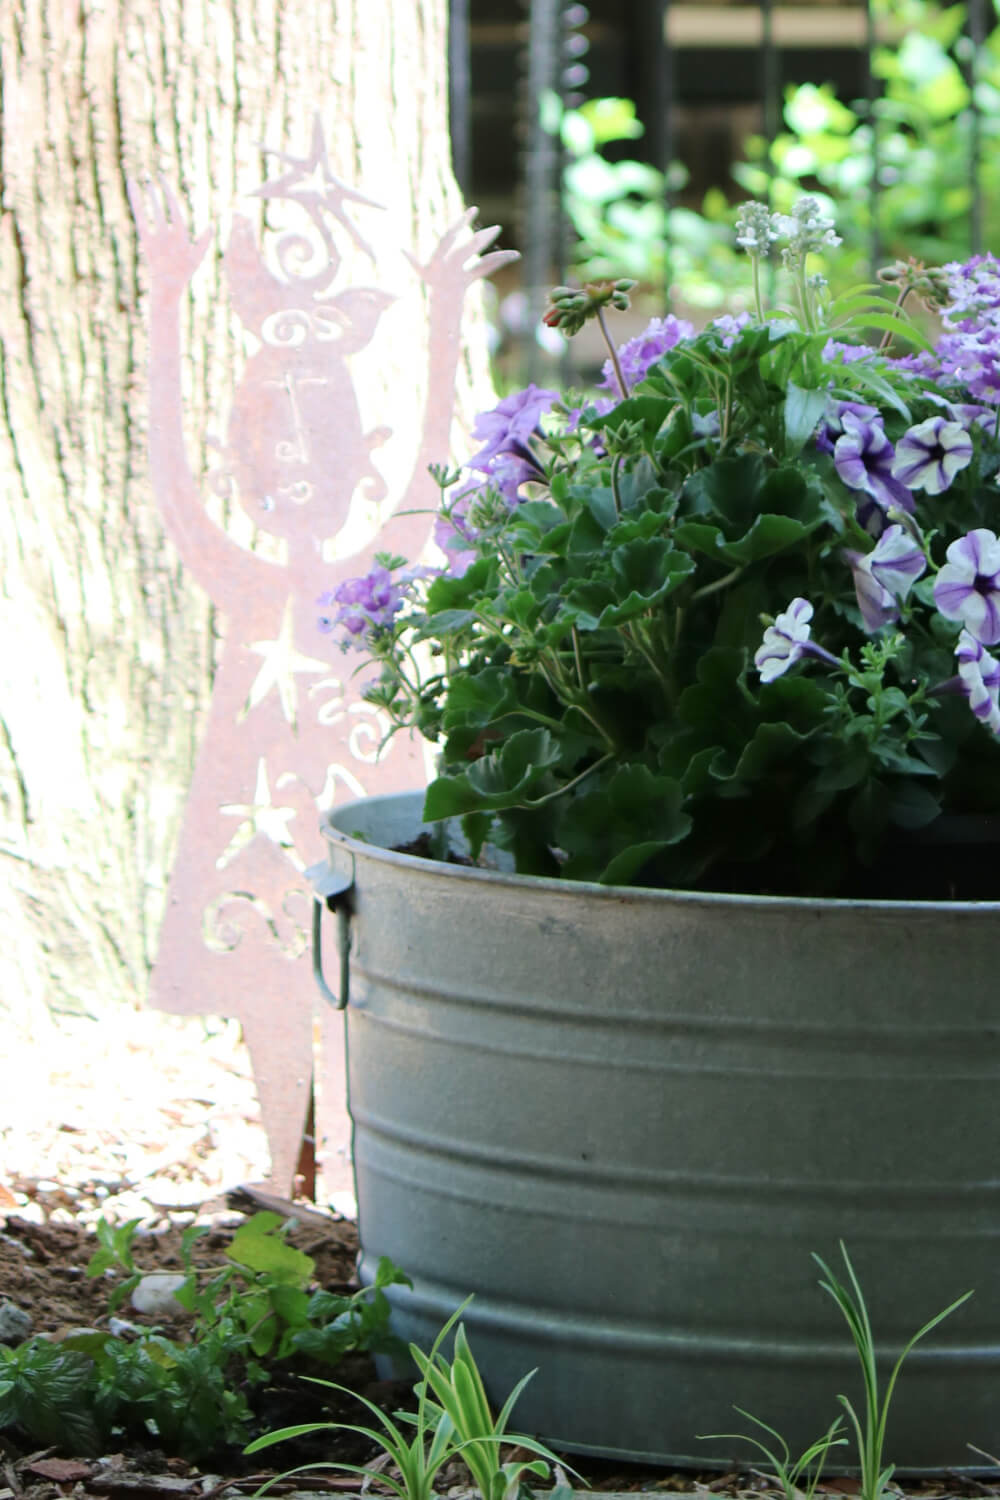 Purple and white petunias in a galvanized container.